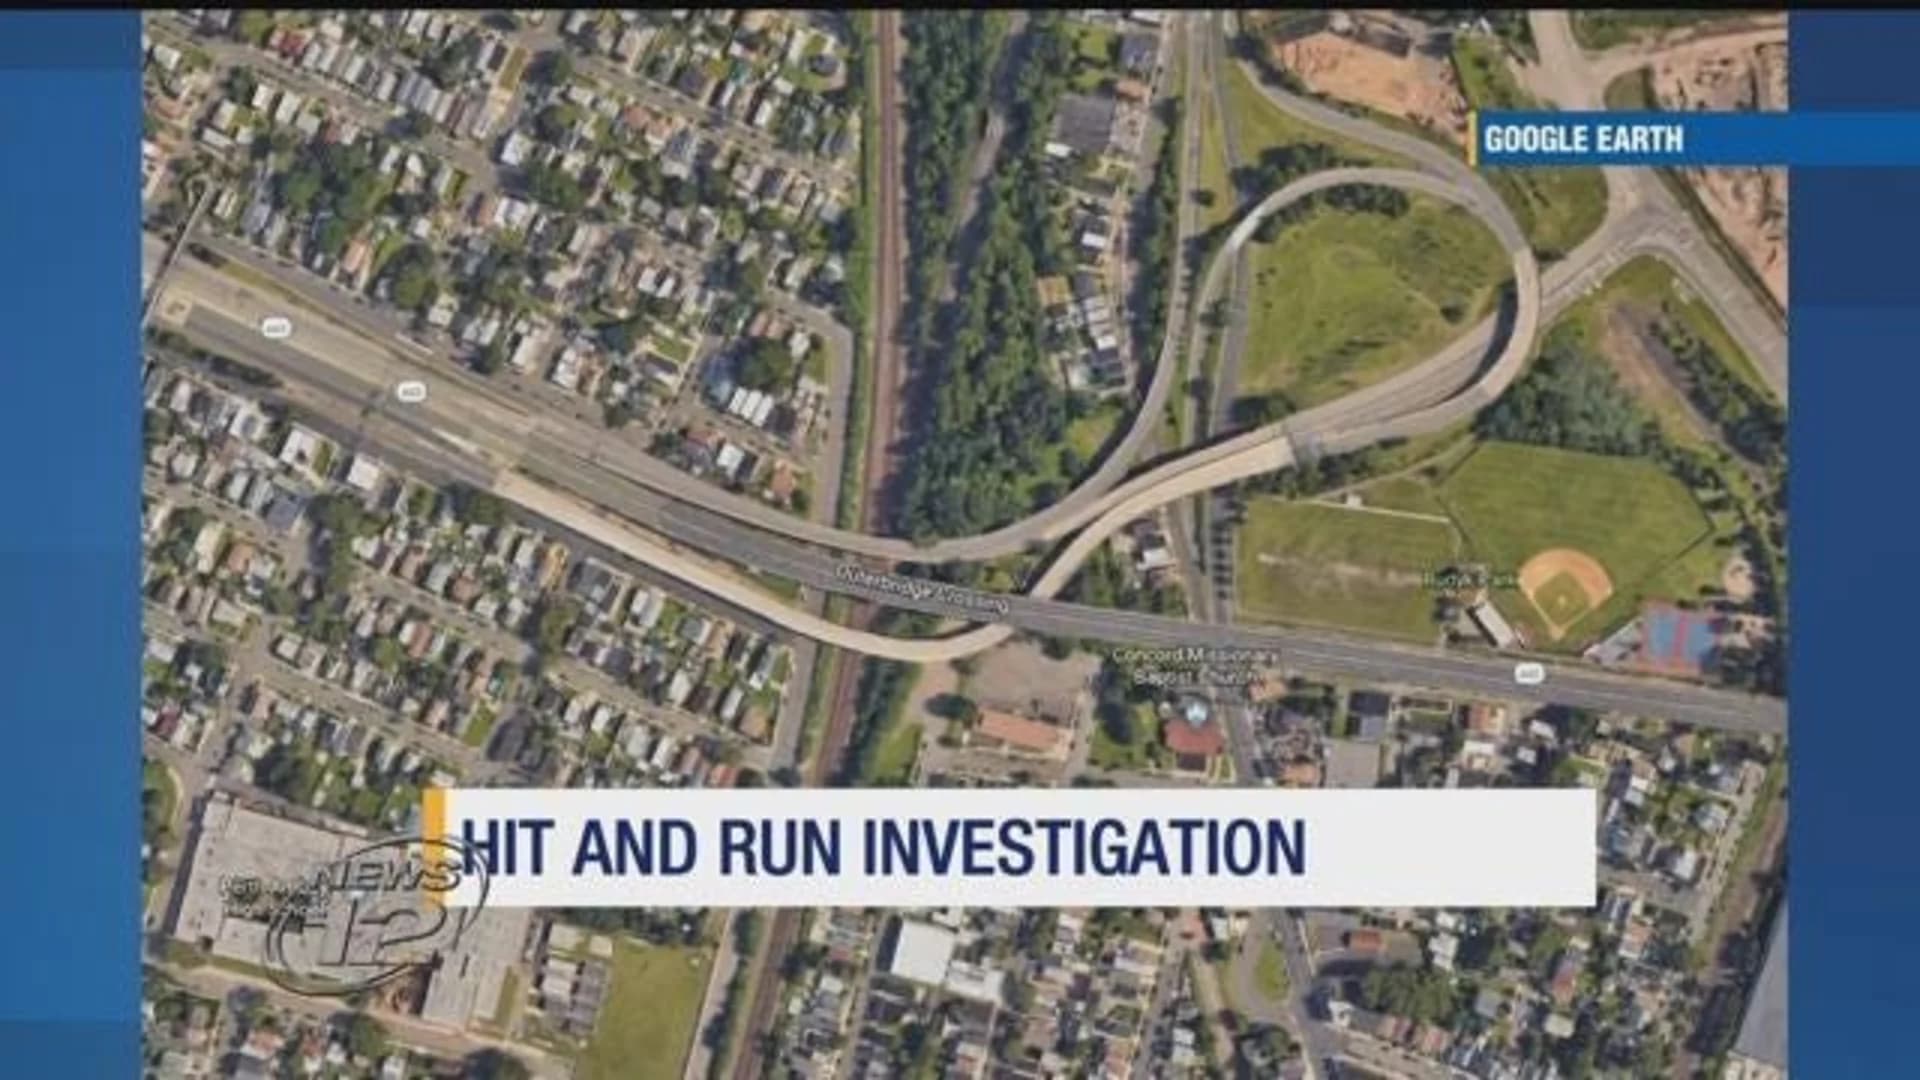 Search continues for driver in fatal hit-and-run on Route 440